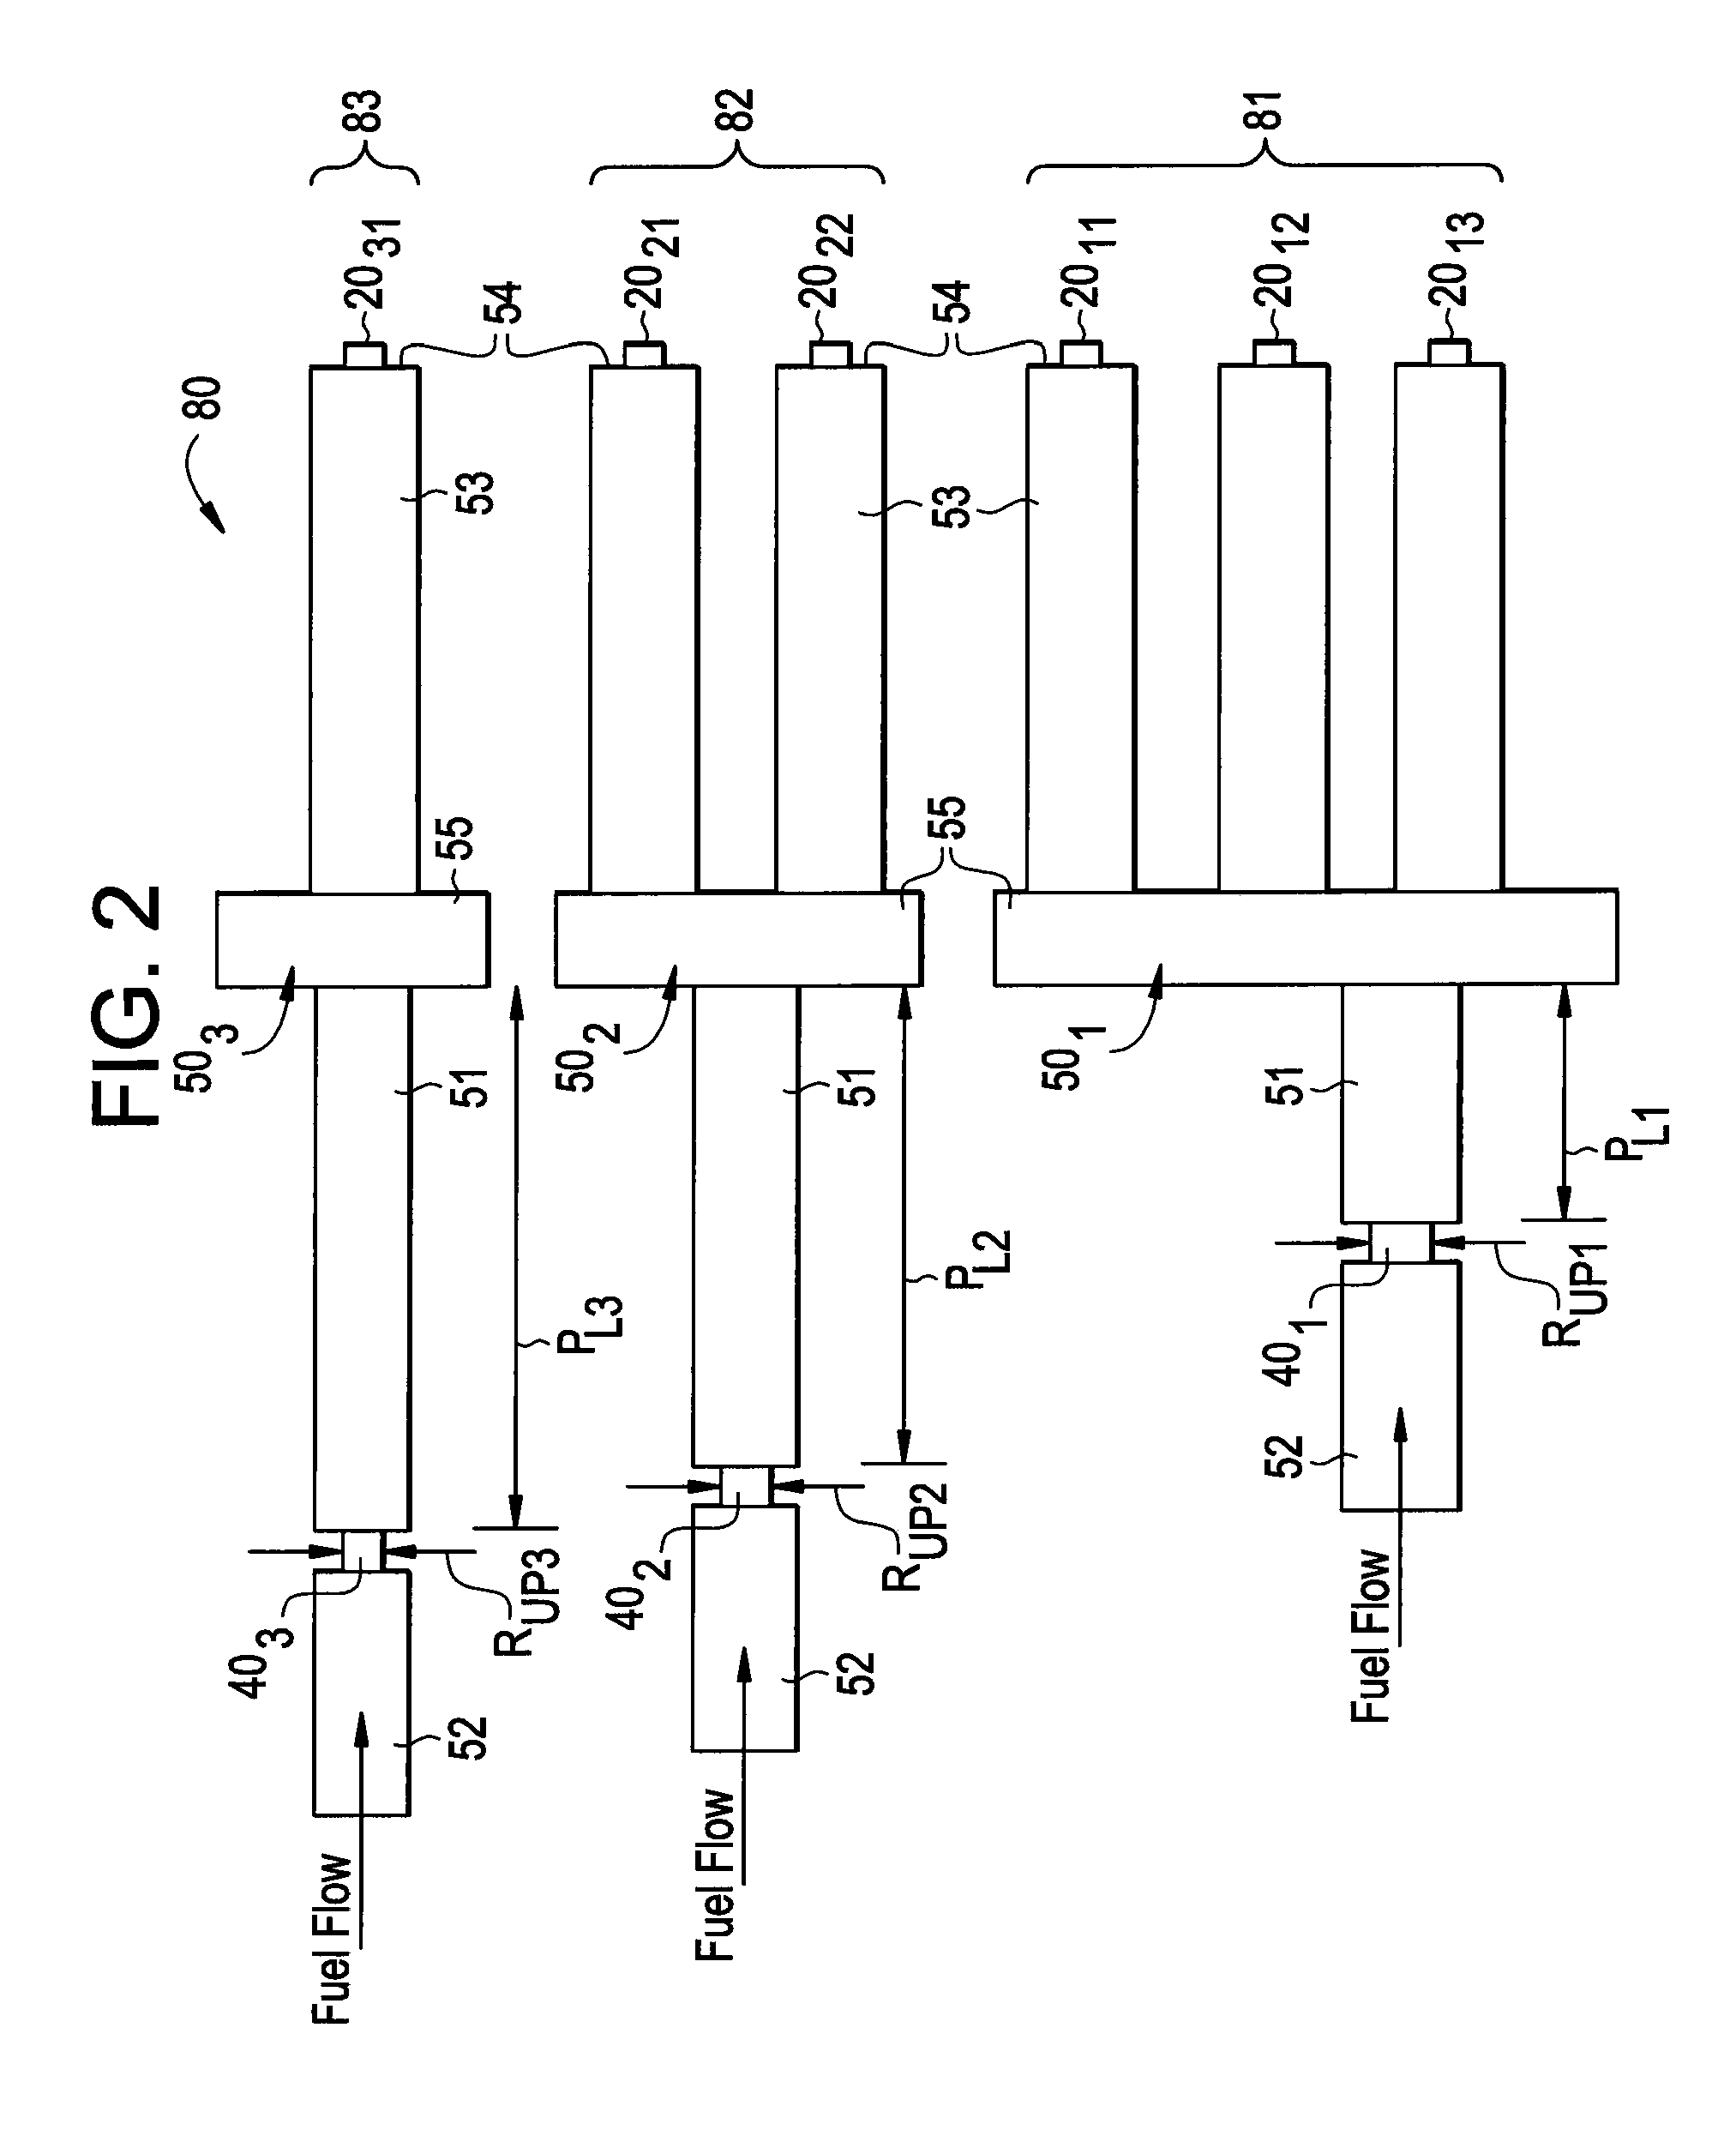 FUEL SYSTEM ACOUSTIC FEATURE TO MITIGATE COMBUSTION DYNAMICS FOR MULTI-NOZZLE DRY LOW Nox COMBUSTION SYSTEM AND METHOD